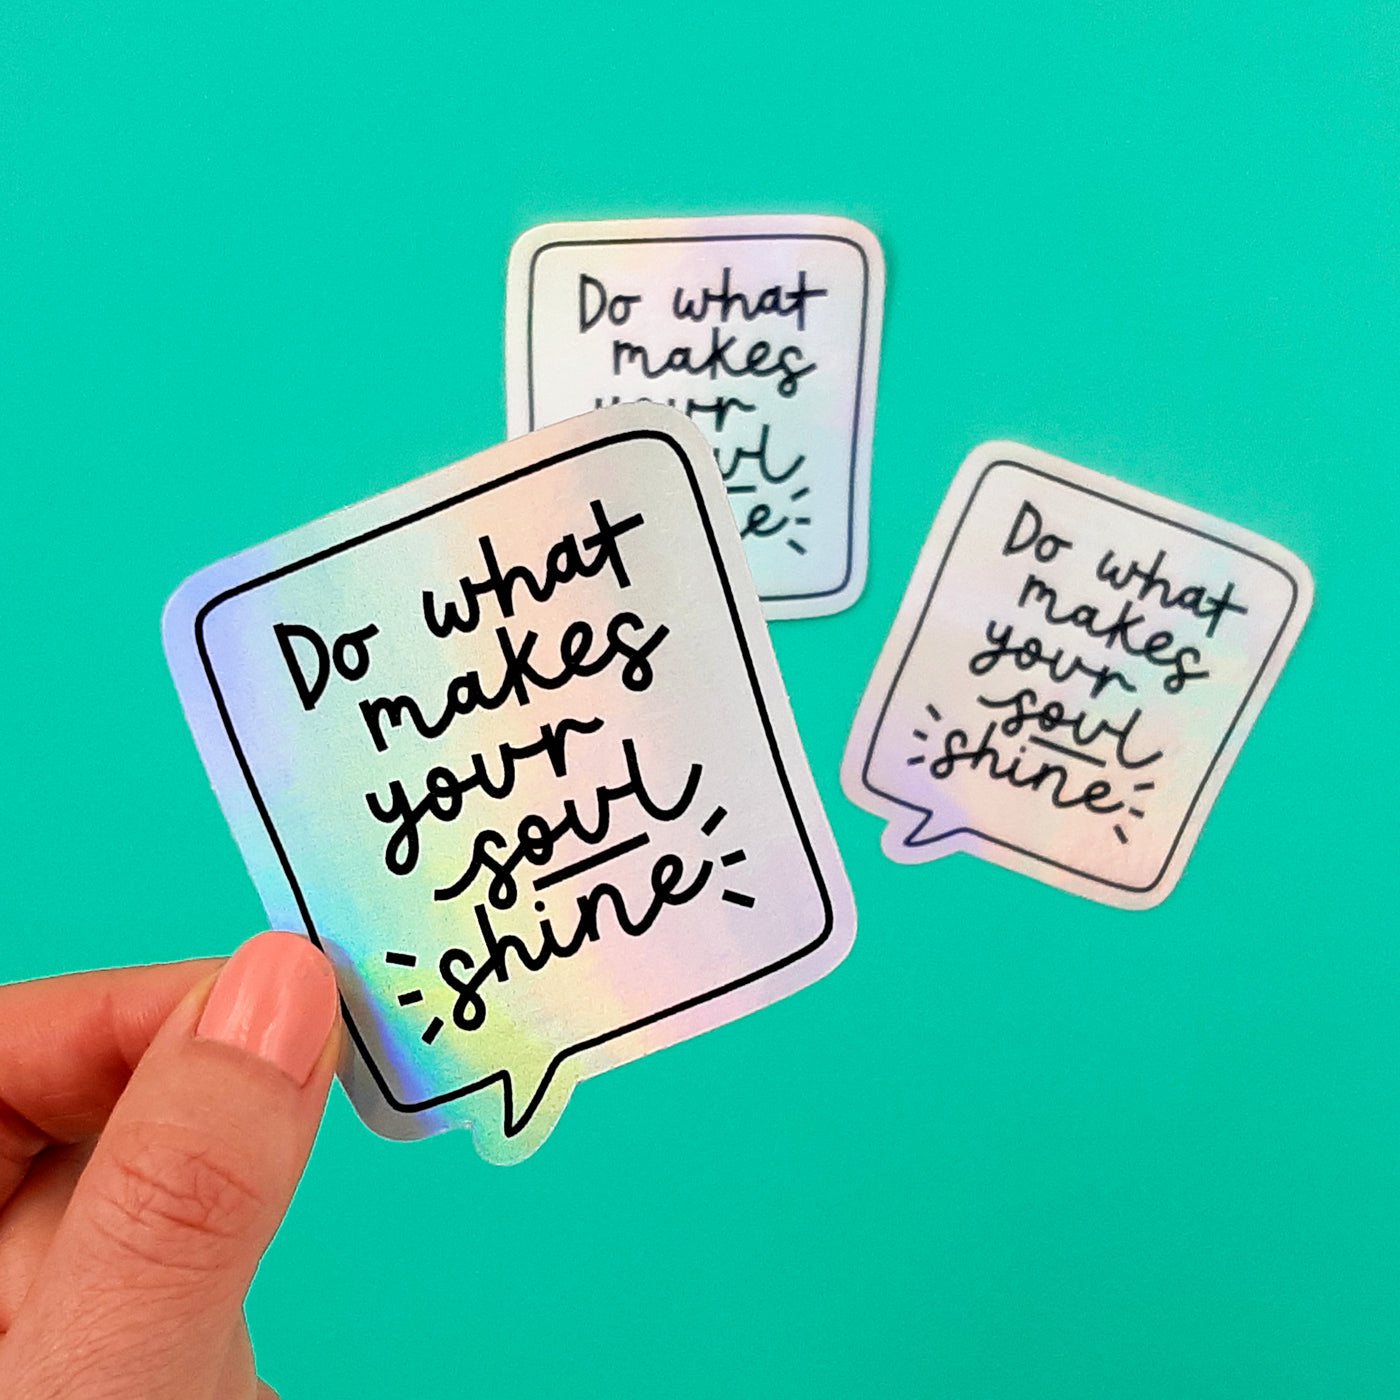 Do What Makes Your Soul Shine Holographic Vinyl Sticker